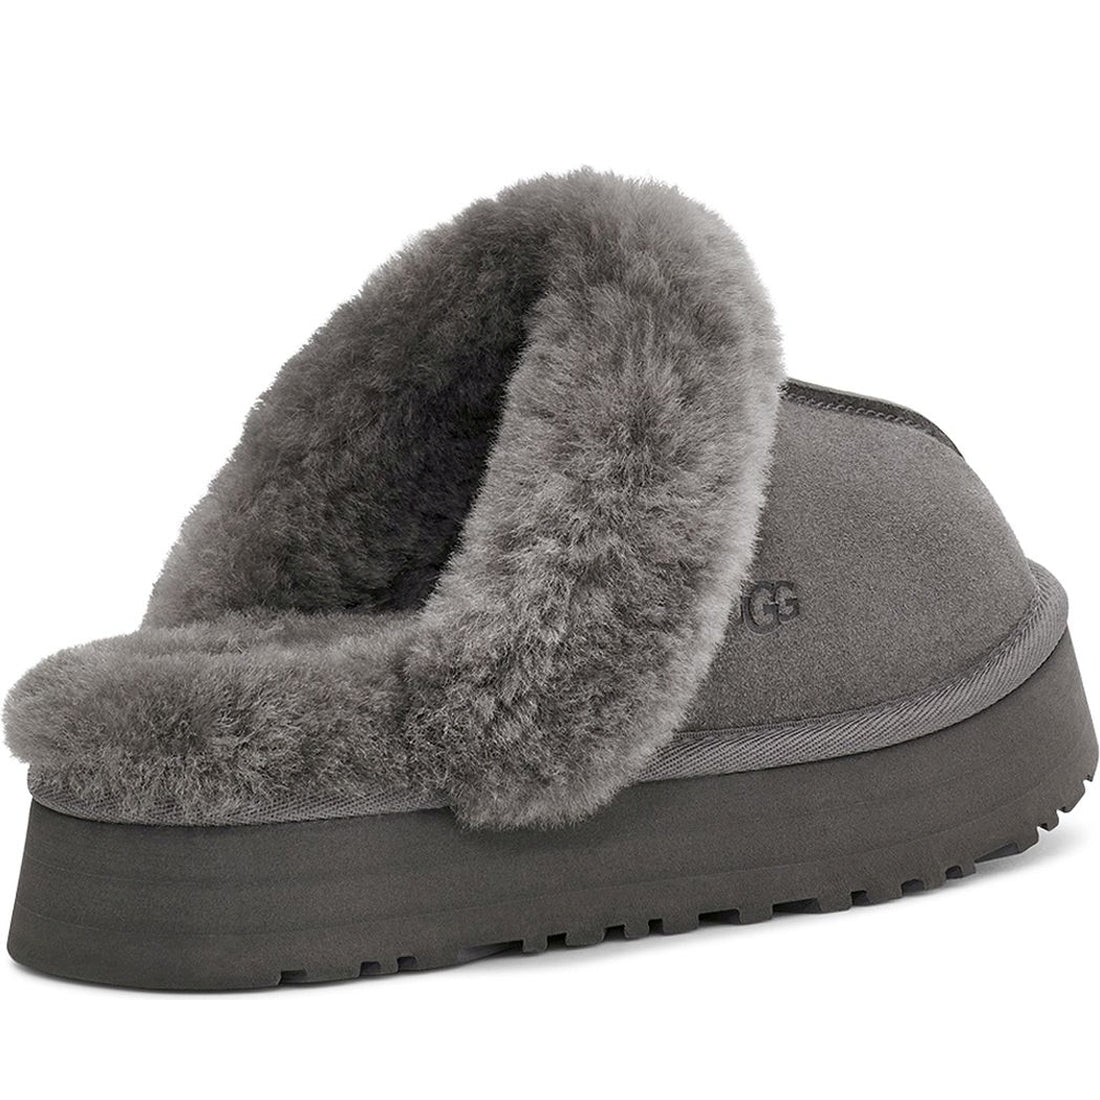 UGG womens charcoal disquette indoor slippers | Vilbury London